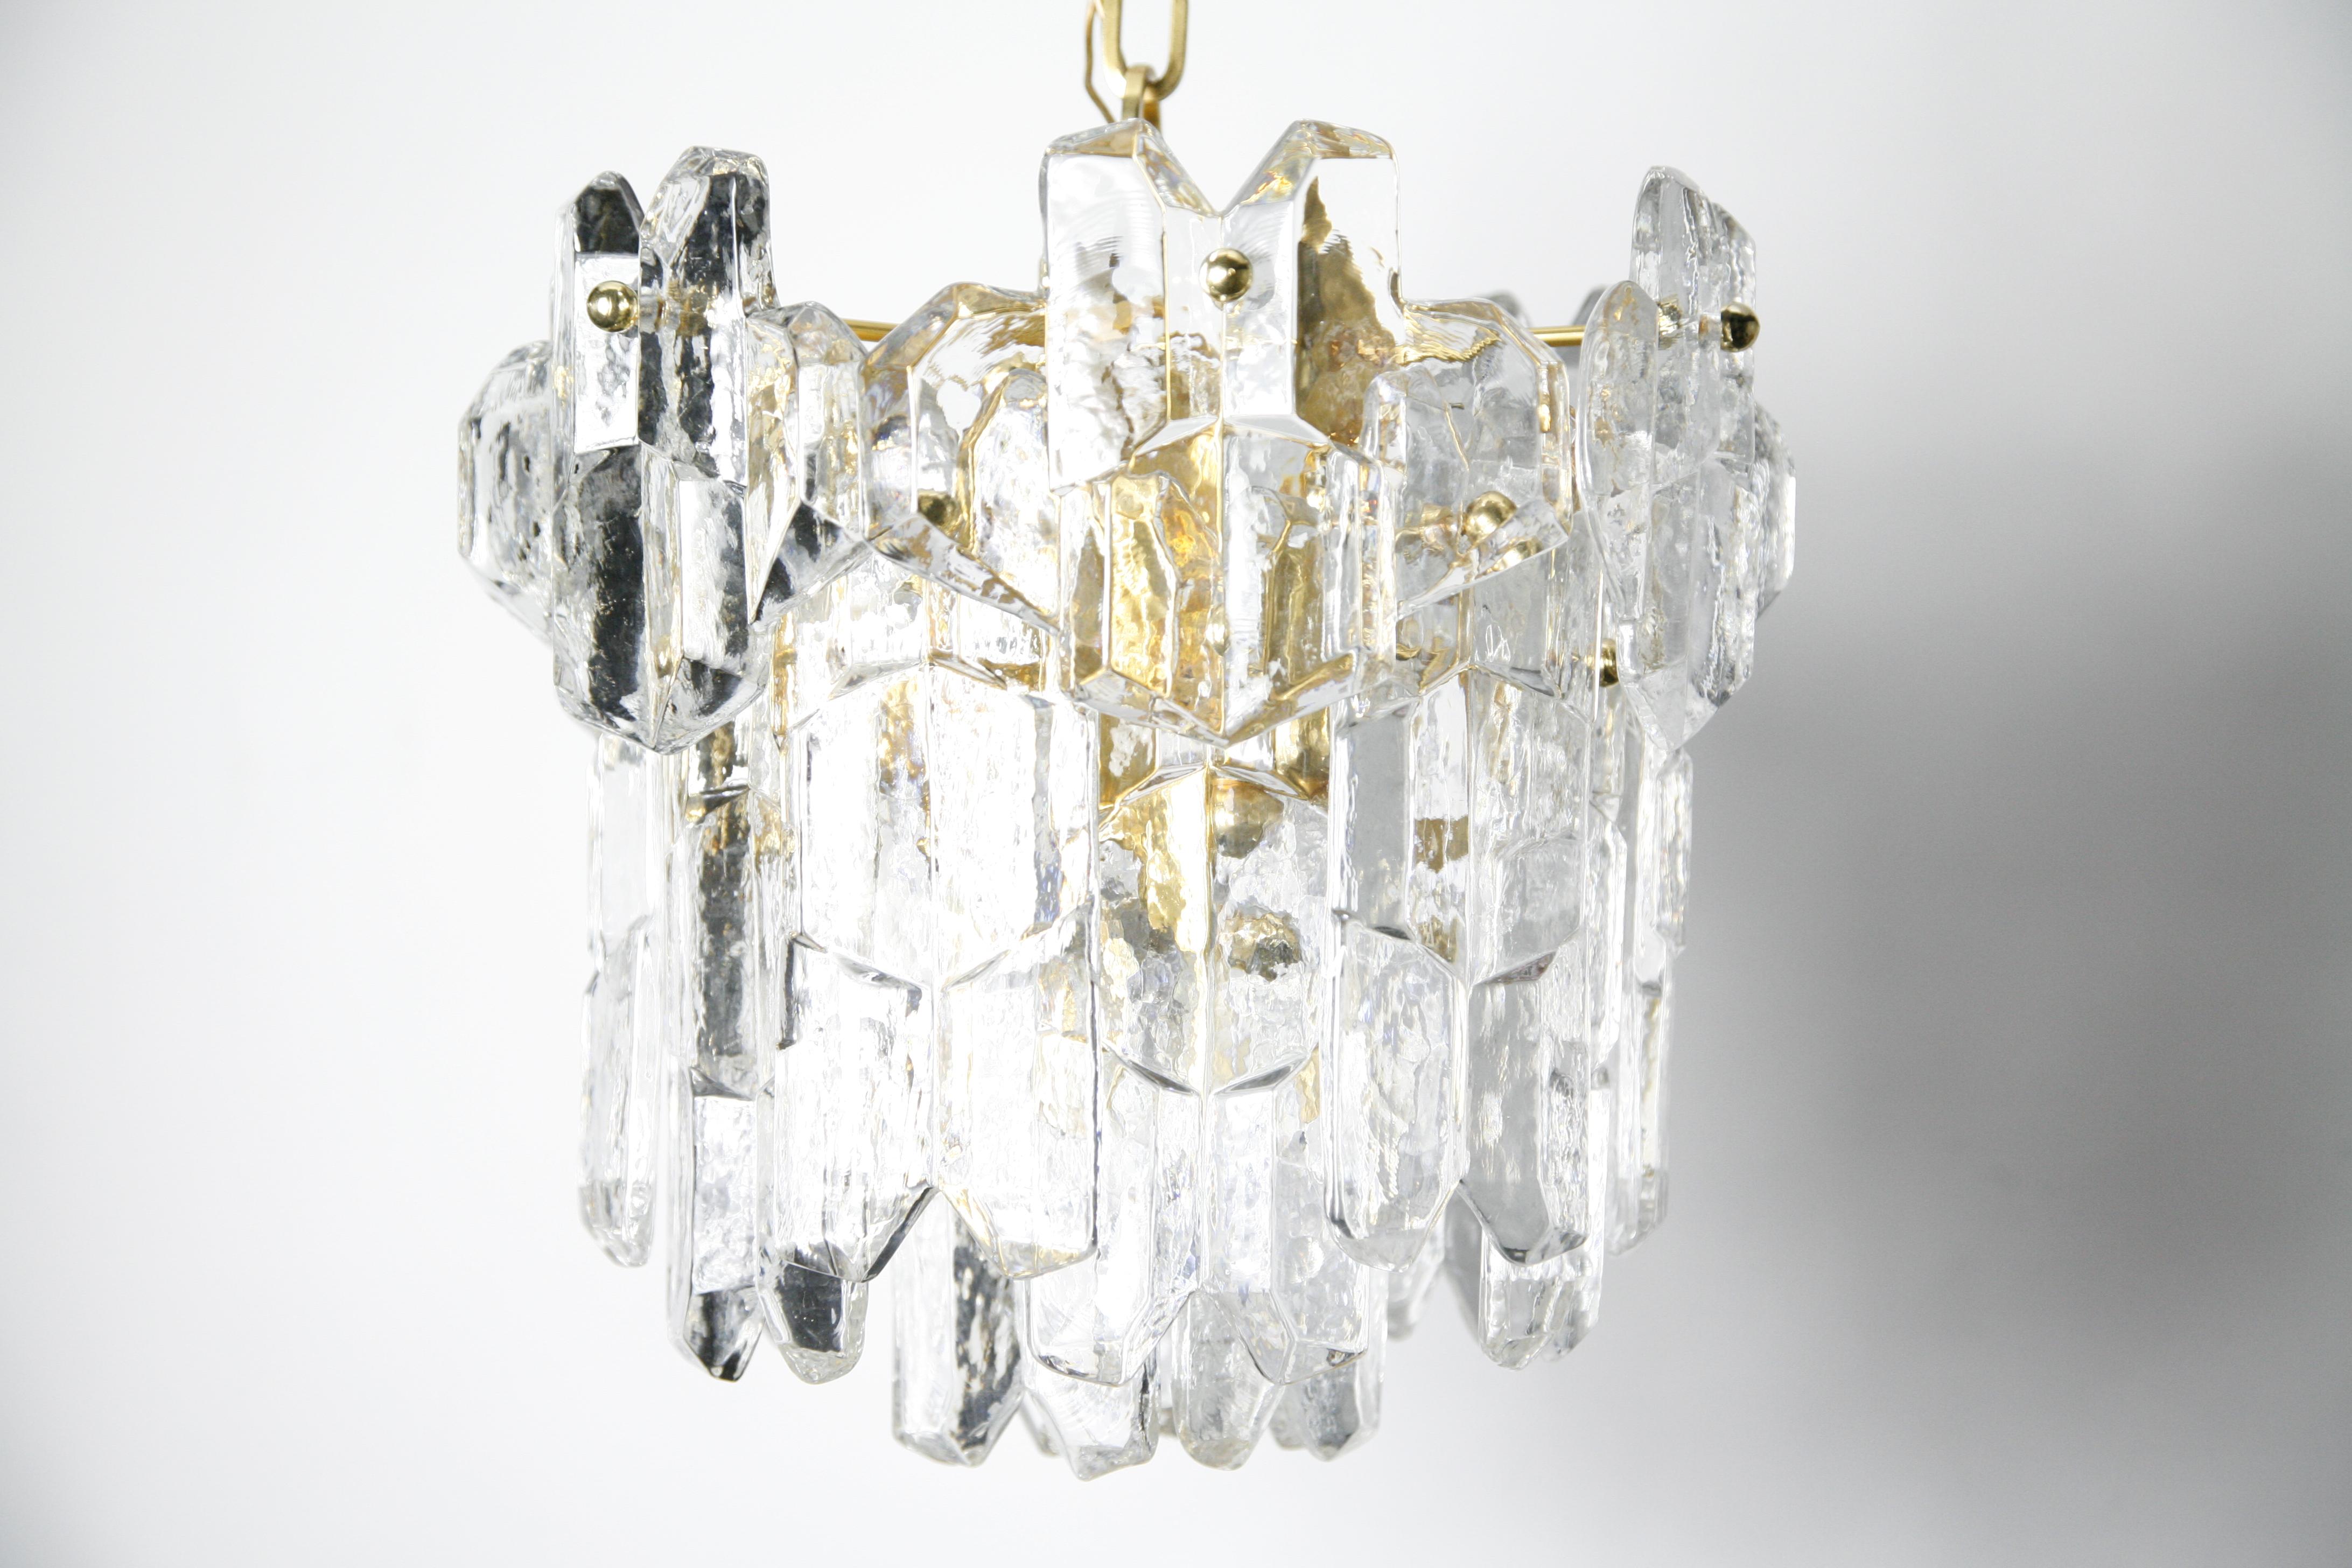 Palazzo Kalmar gold crystal glass chandelier from the 1970s, Austria.
gold gilded frame holding 22 pieces of thick exceptionally high quality crystal glass, the inside of the glass is clear and flat, there is seven original European light sources